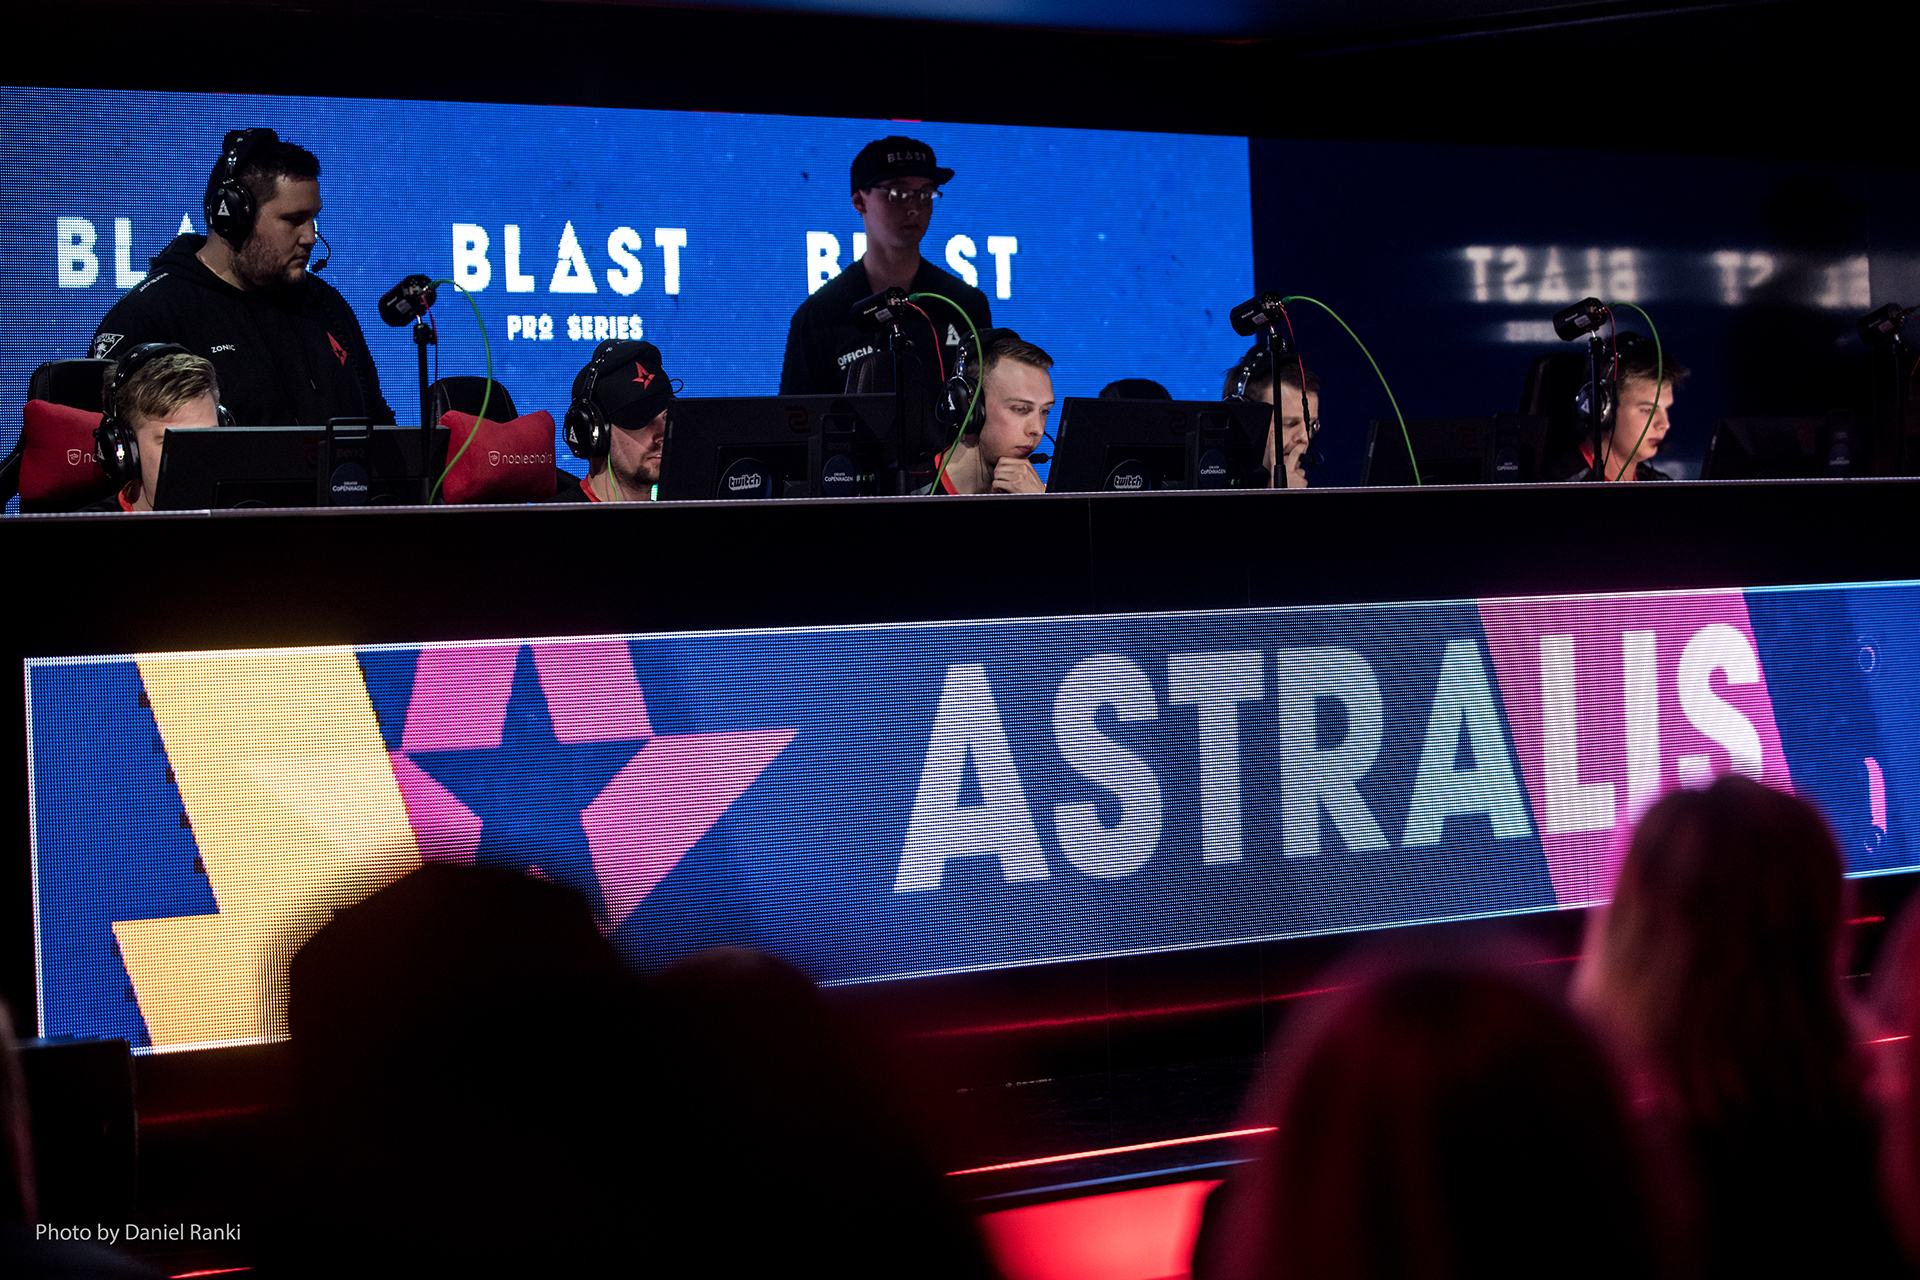 Astralis with dennis as stand-in at BLAST Pro Series Copenhagen